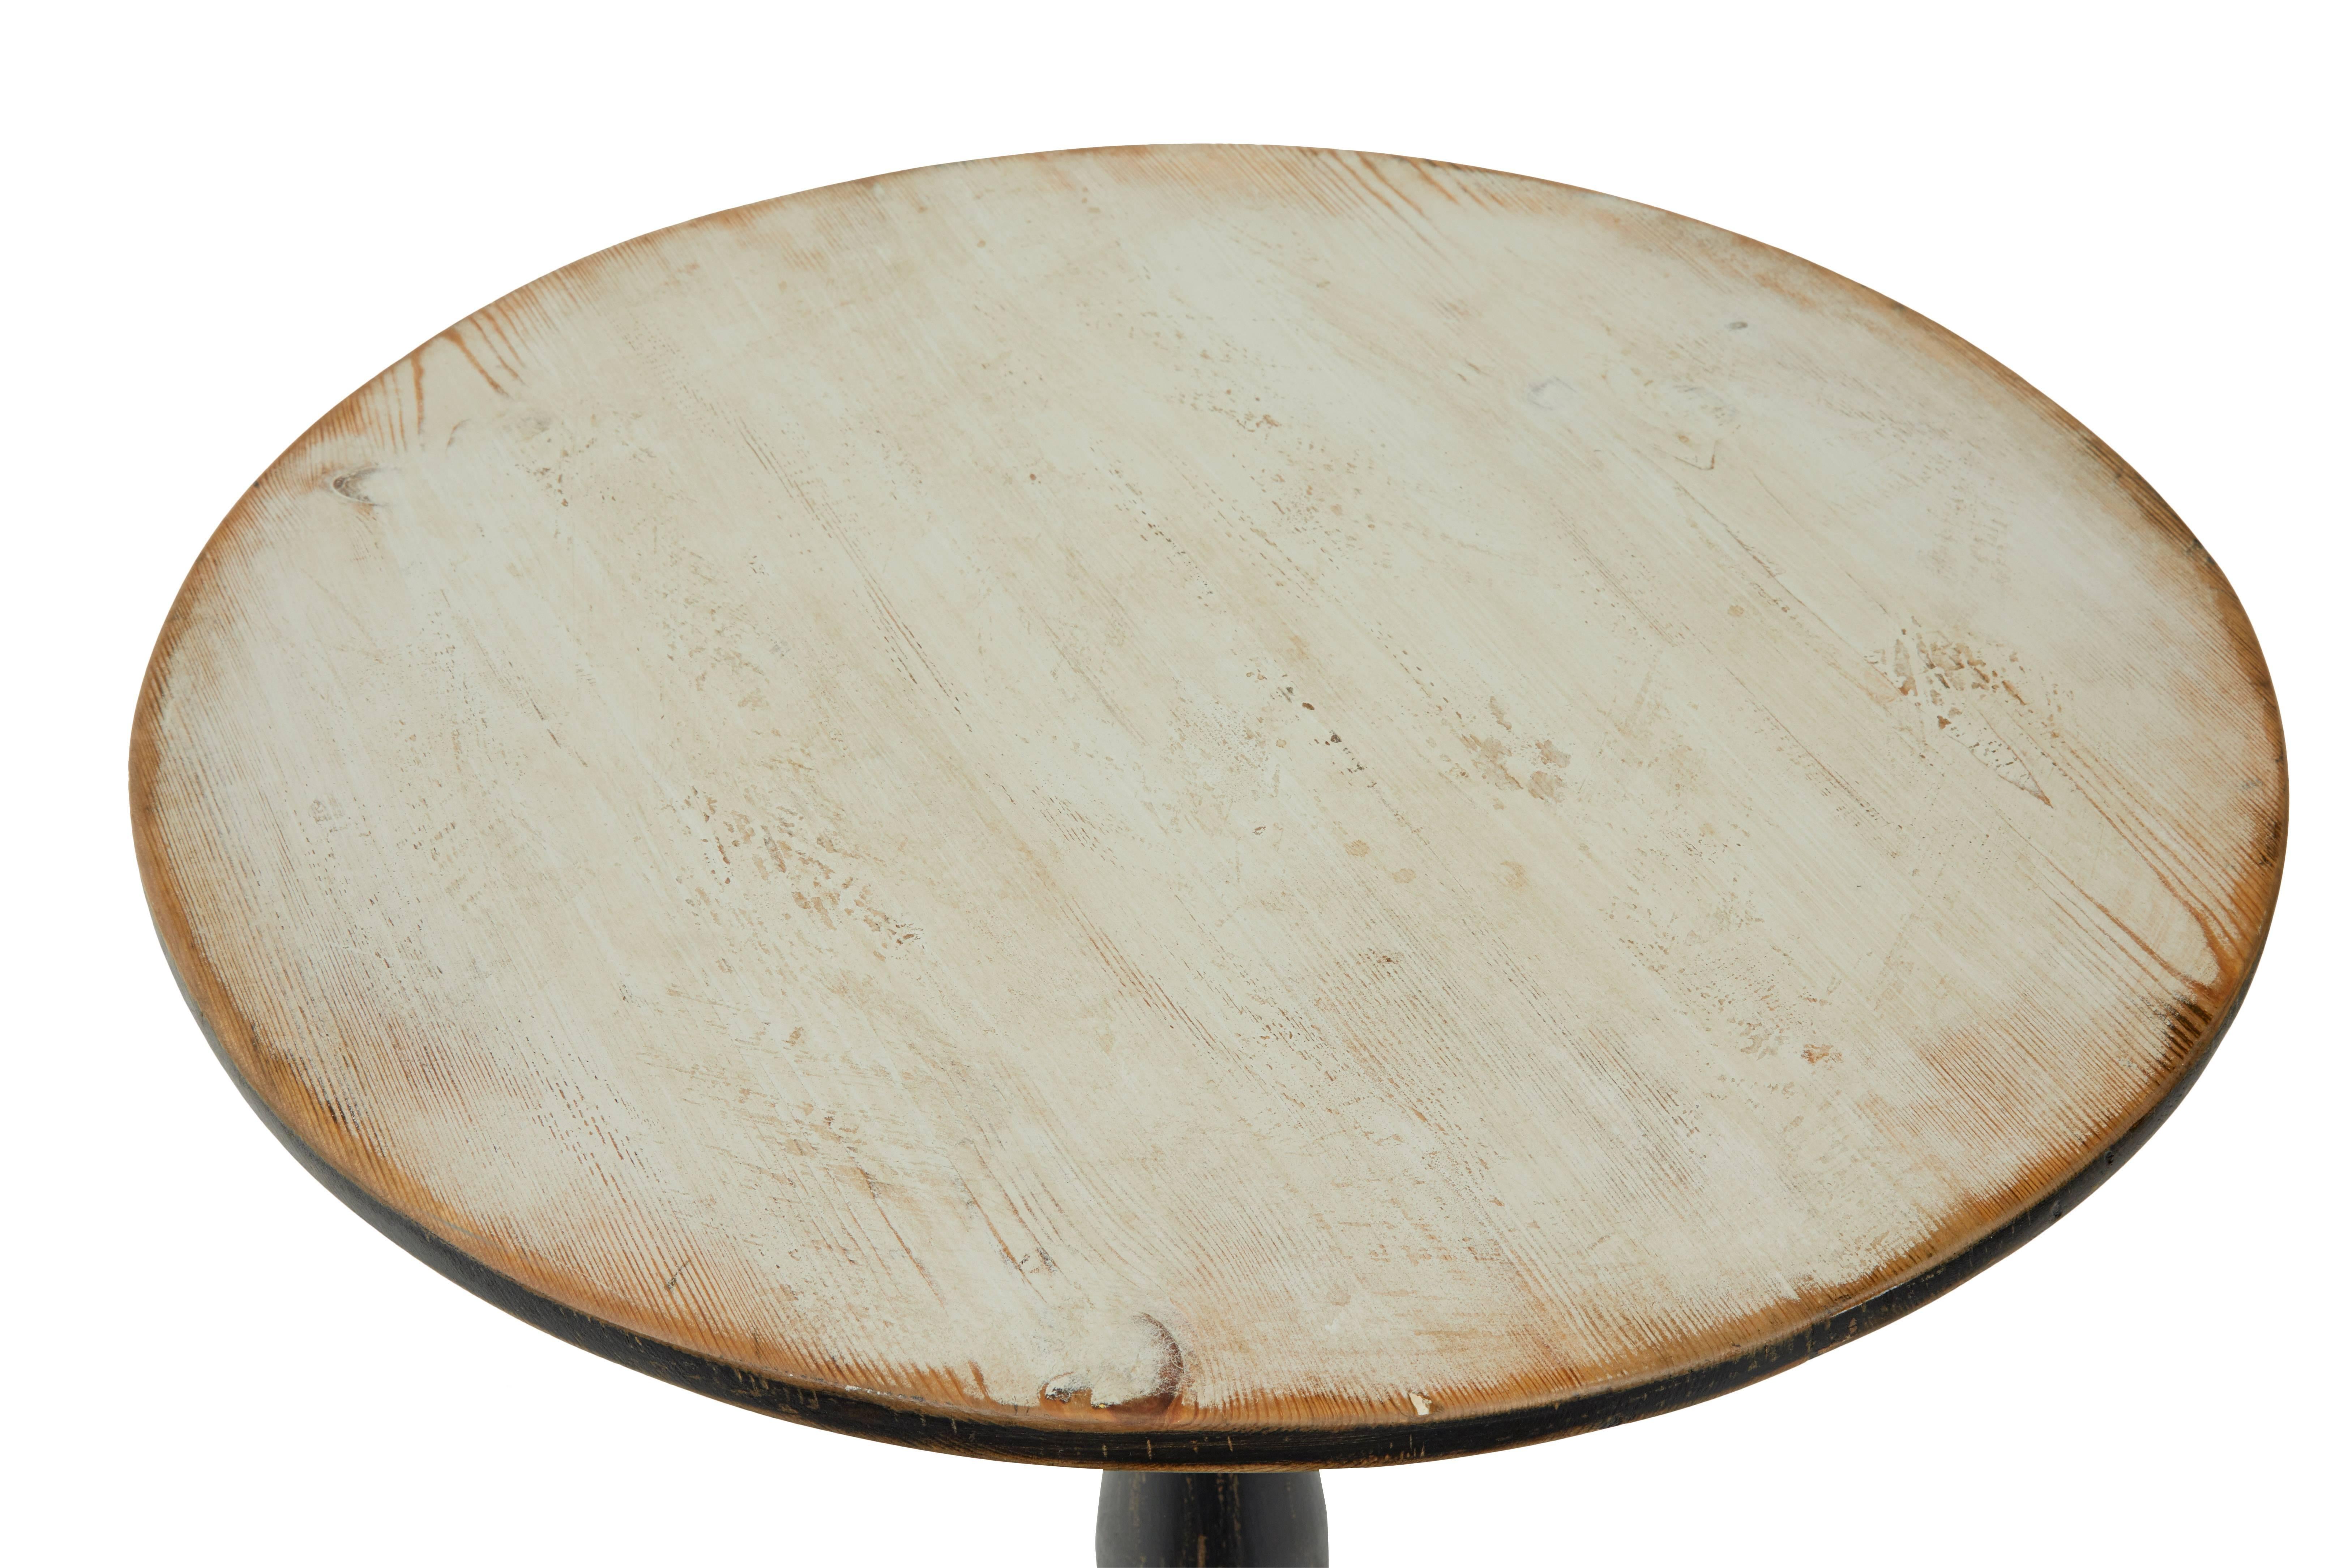 Original Swedish painted circular painted tripod table, circa 1870.
Tripod table in a fixed position
Black painted tripod base with an off-white painted top surface.

Measures: Height 29 1/3